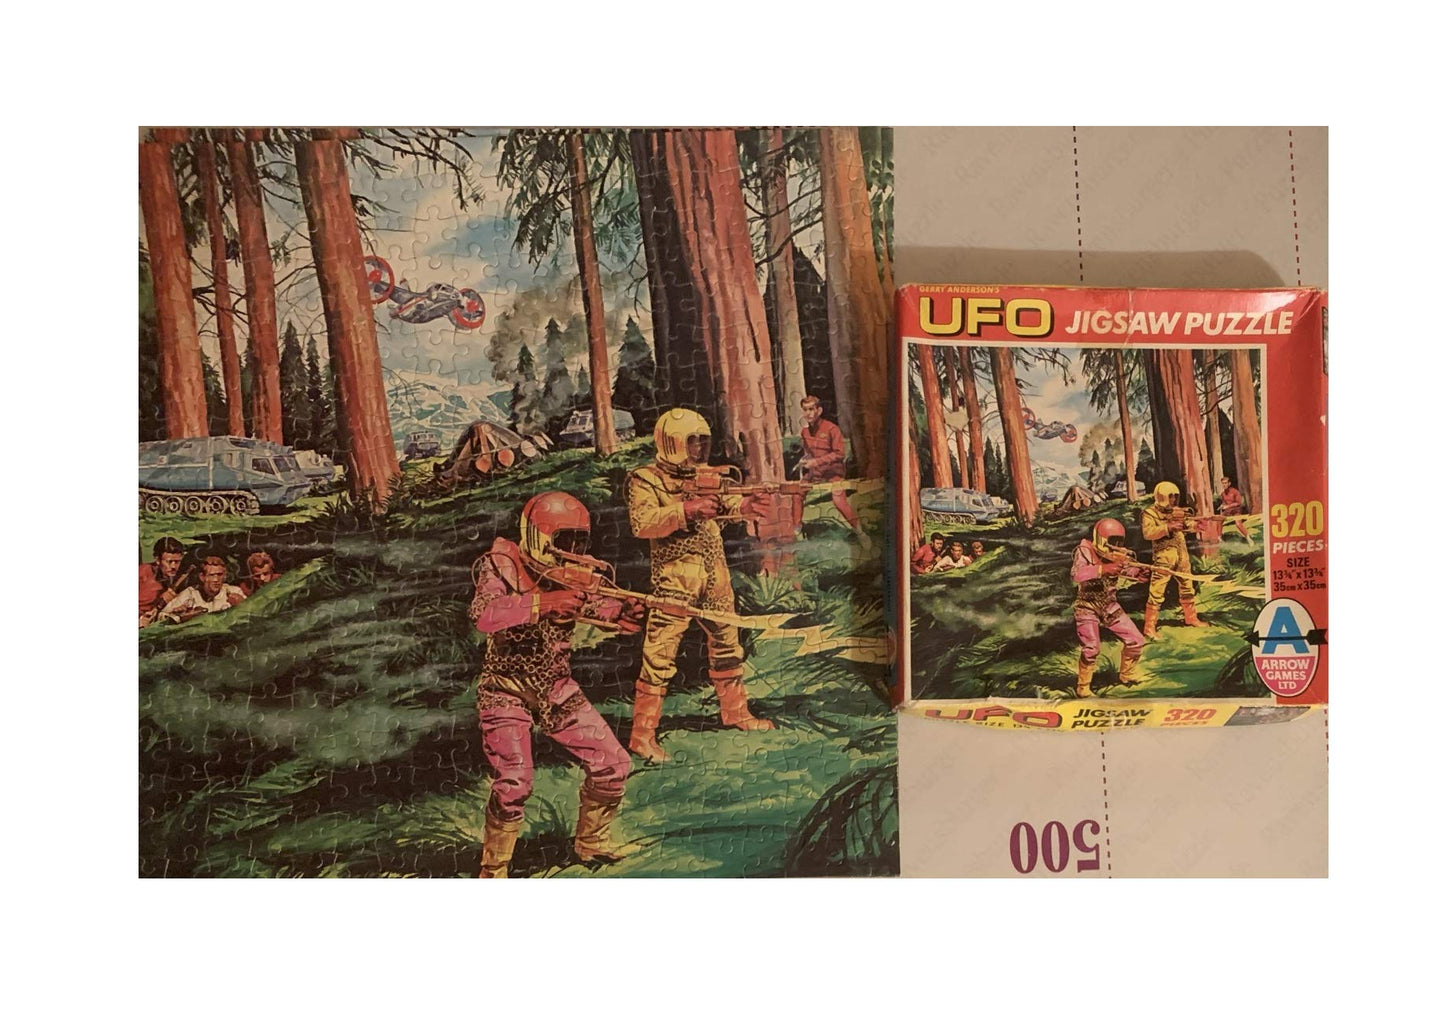 Vintage Gerry Andersons Arrow Games Ltd 1970 UFO 320 Piece Jigsaw Puzzle No. 2316 The Aliens Last Stand - Complete And In The Original Box